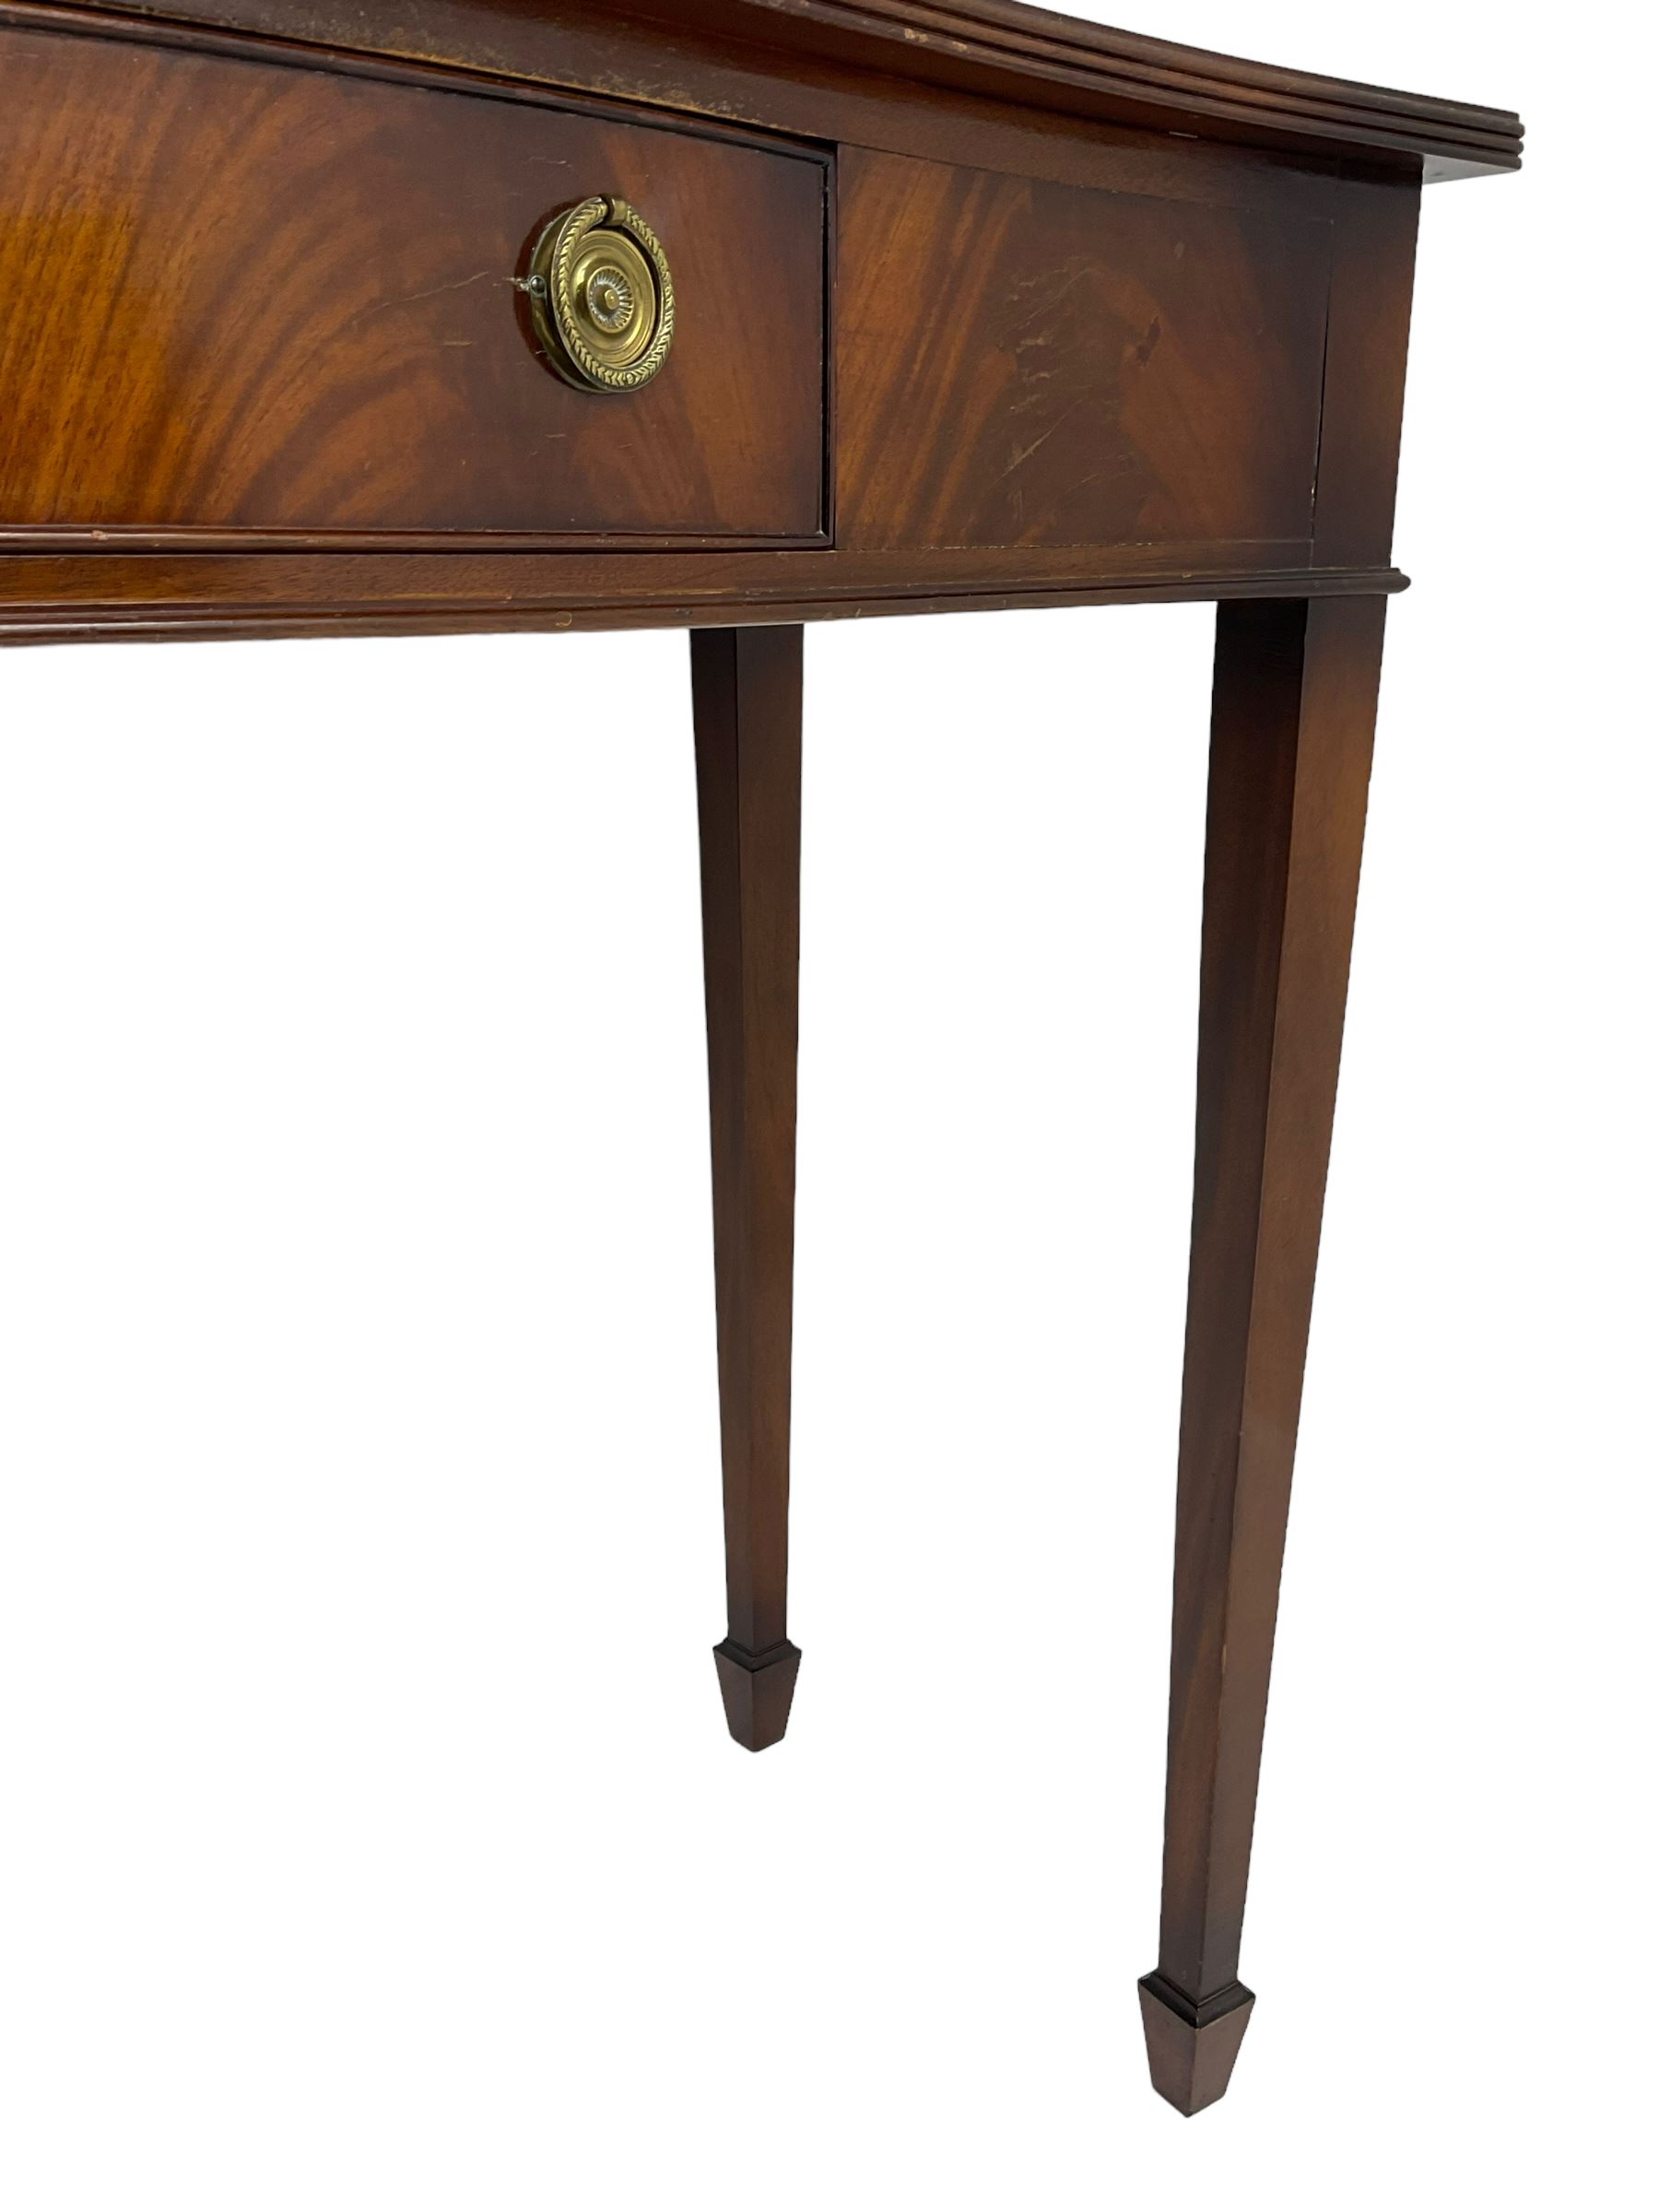 Georgian design mahogany serpentine fronted side table - Image 2 of 5